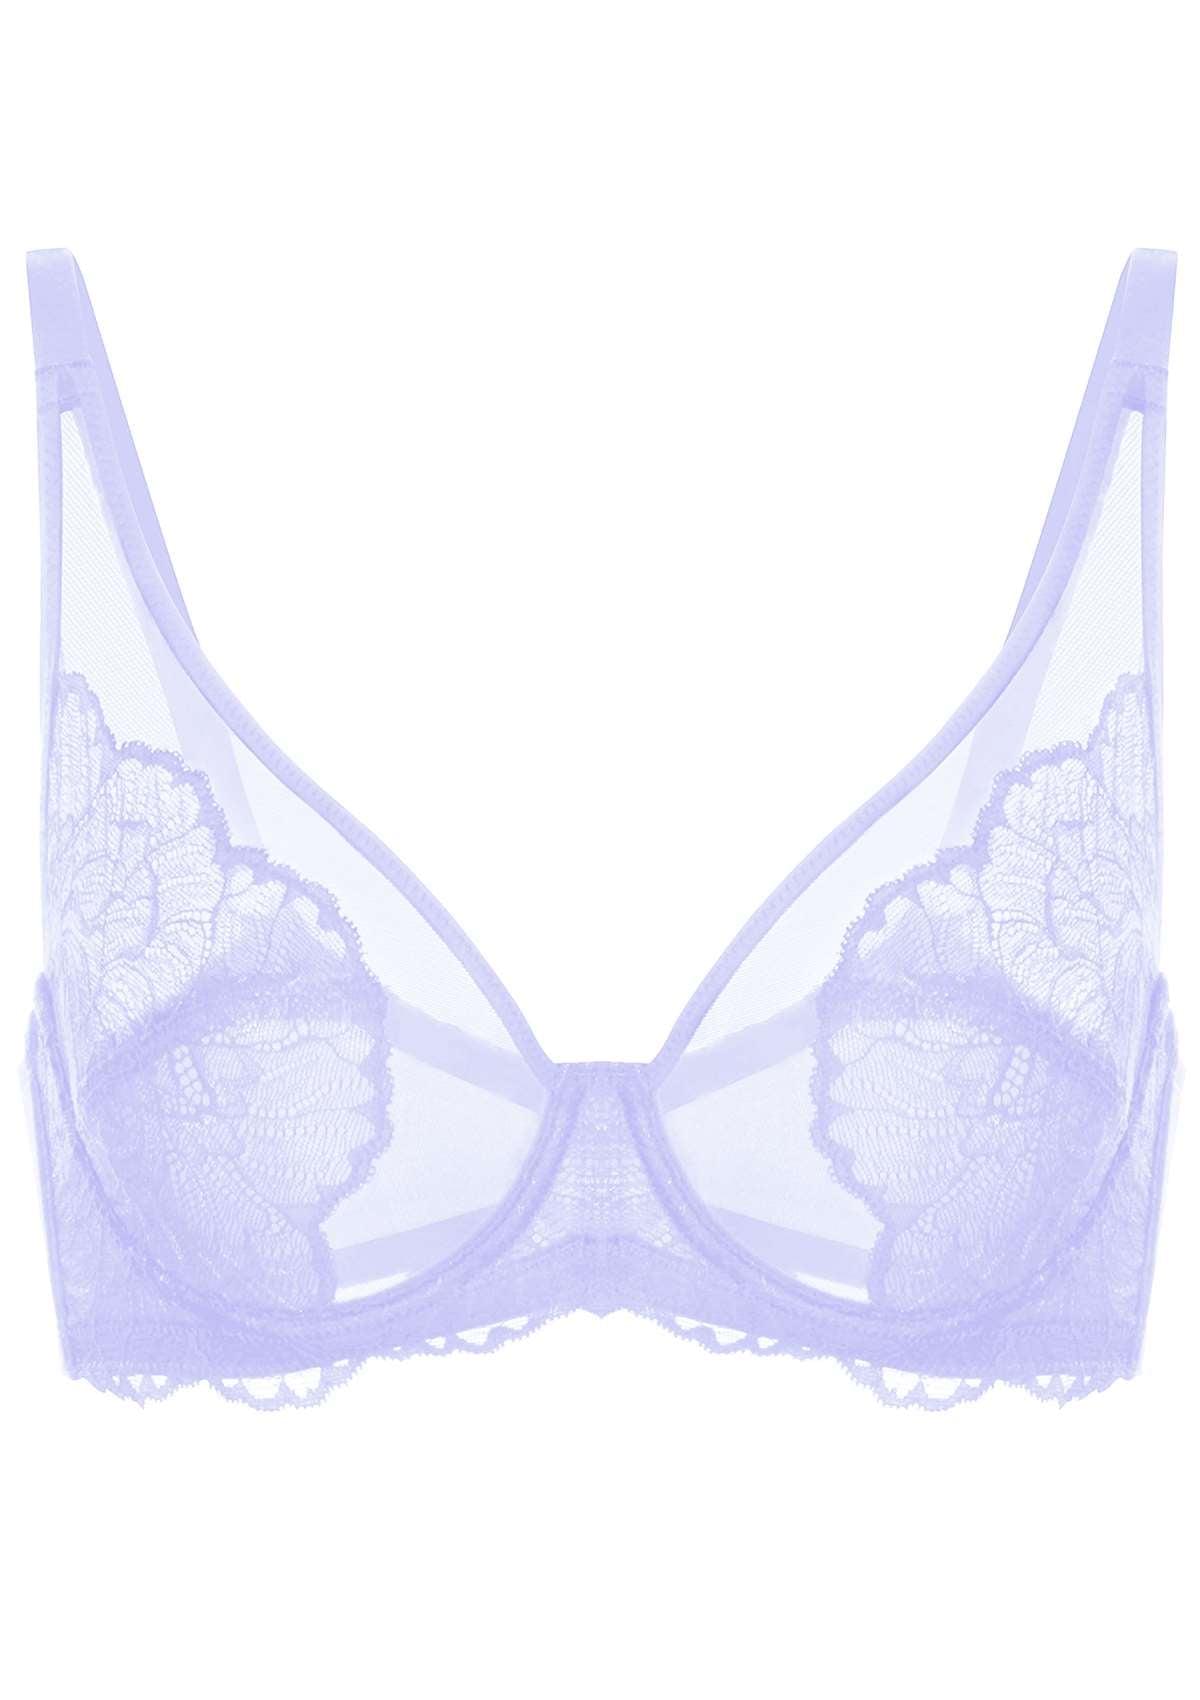 HSIA Blossom Transparent Lace Bra: Plus Size Wired Back Smoothing Bra - Purple / 34 / D